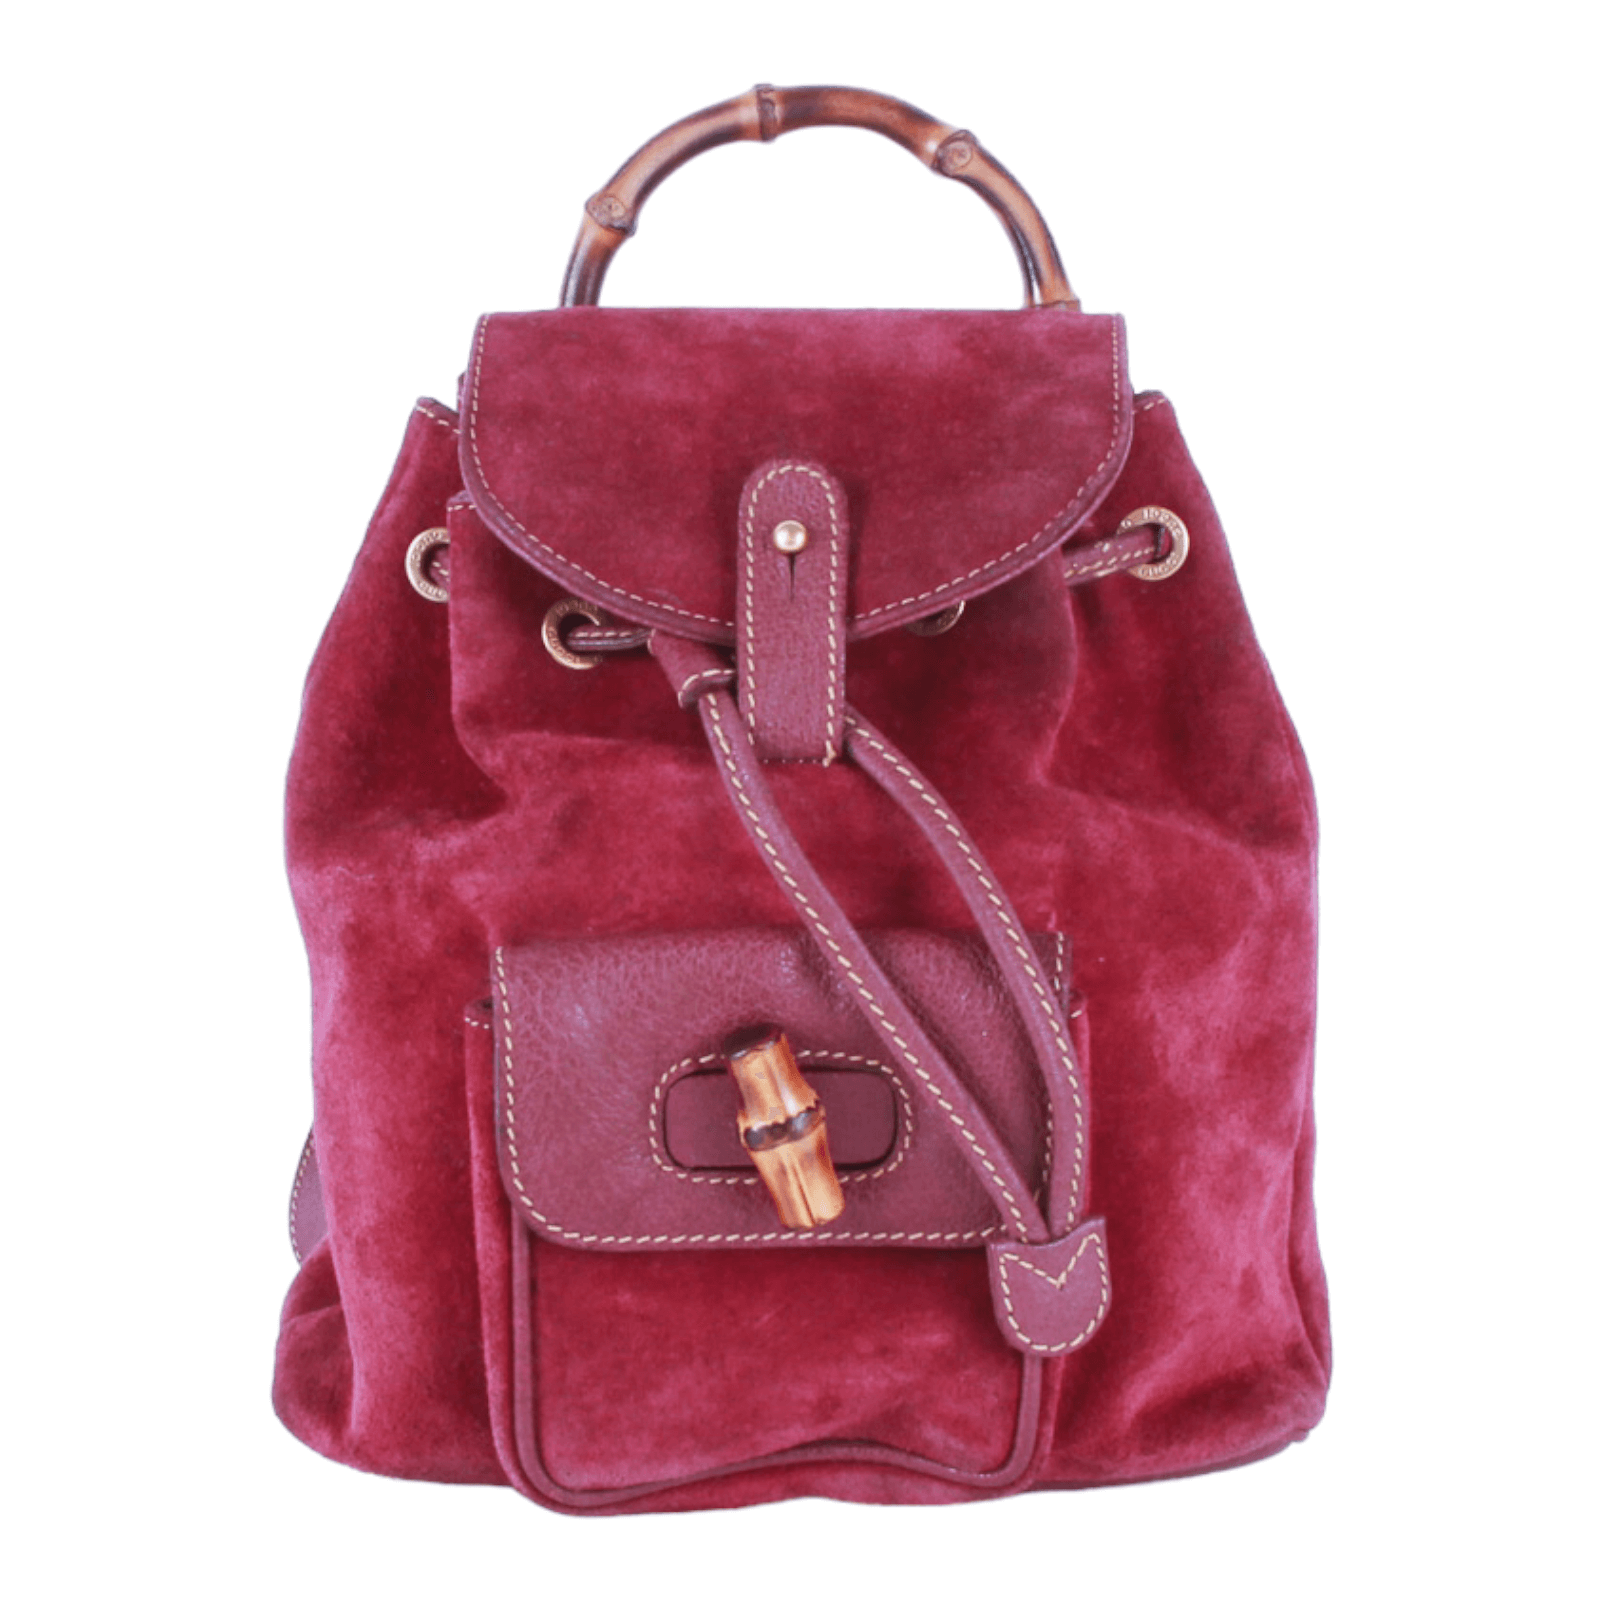 Authentic Gucci Vintage purple suede leather & bamboo mini Backpack